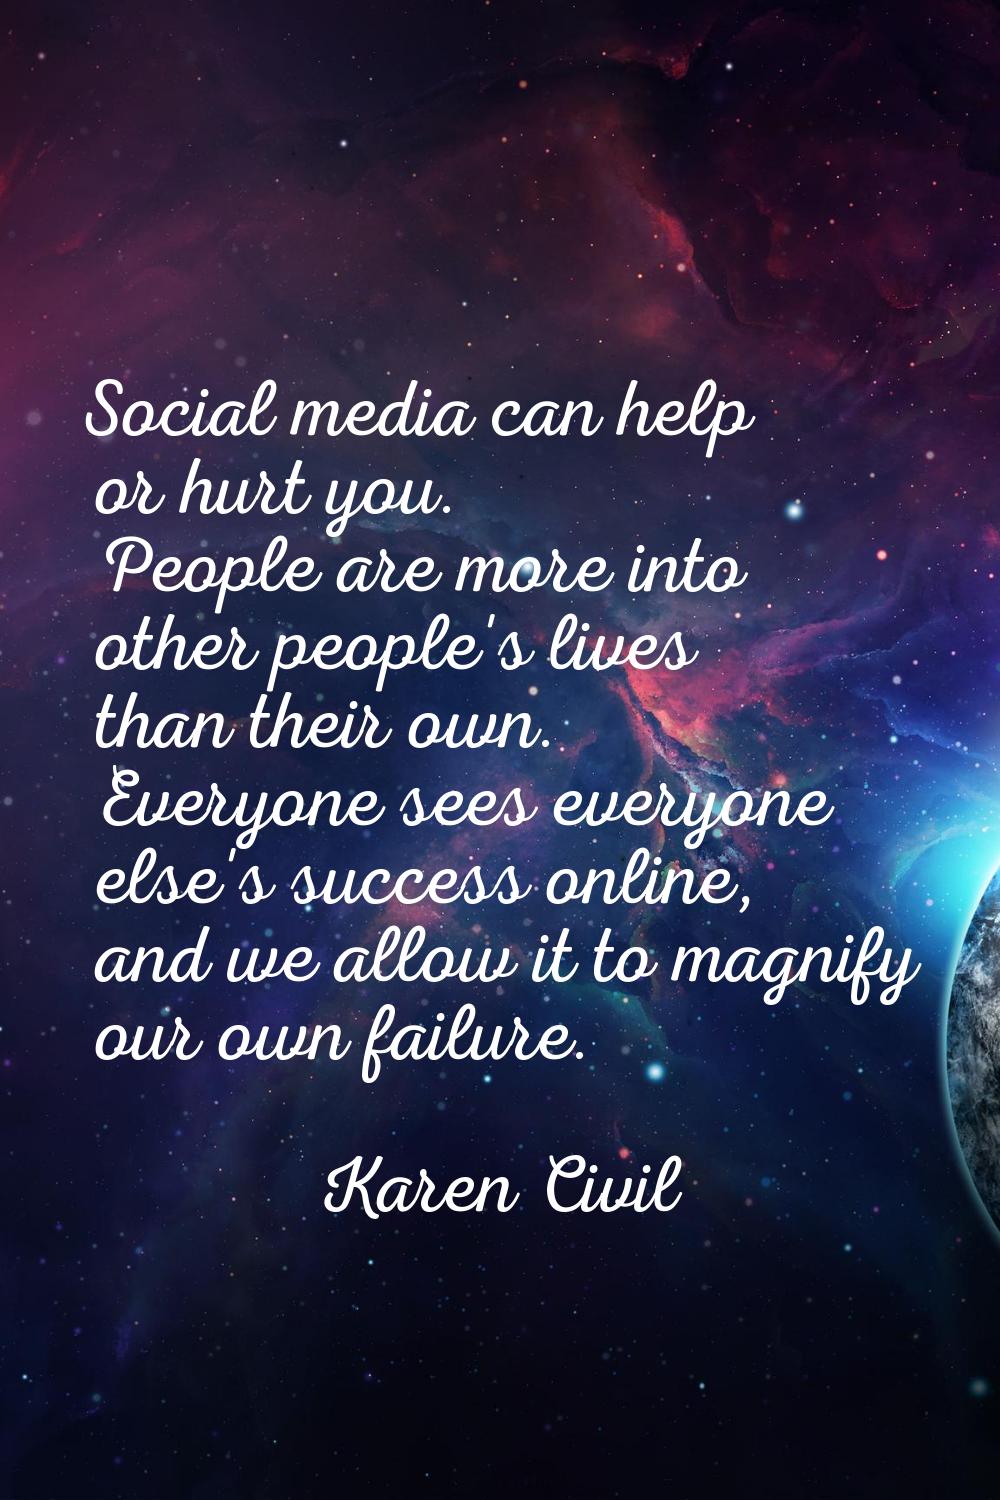 Social media can help or hurt you. People are more into other people's lives than their own. Everyo